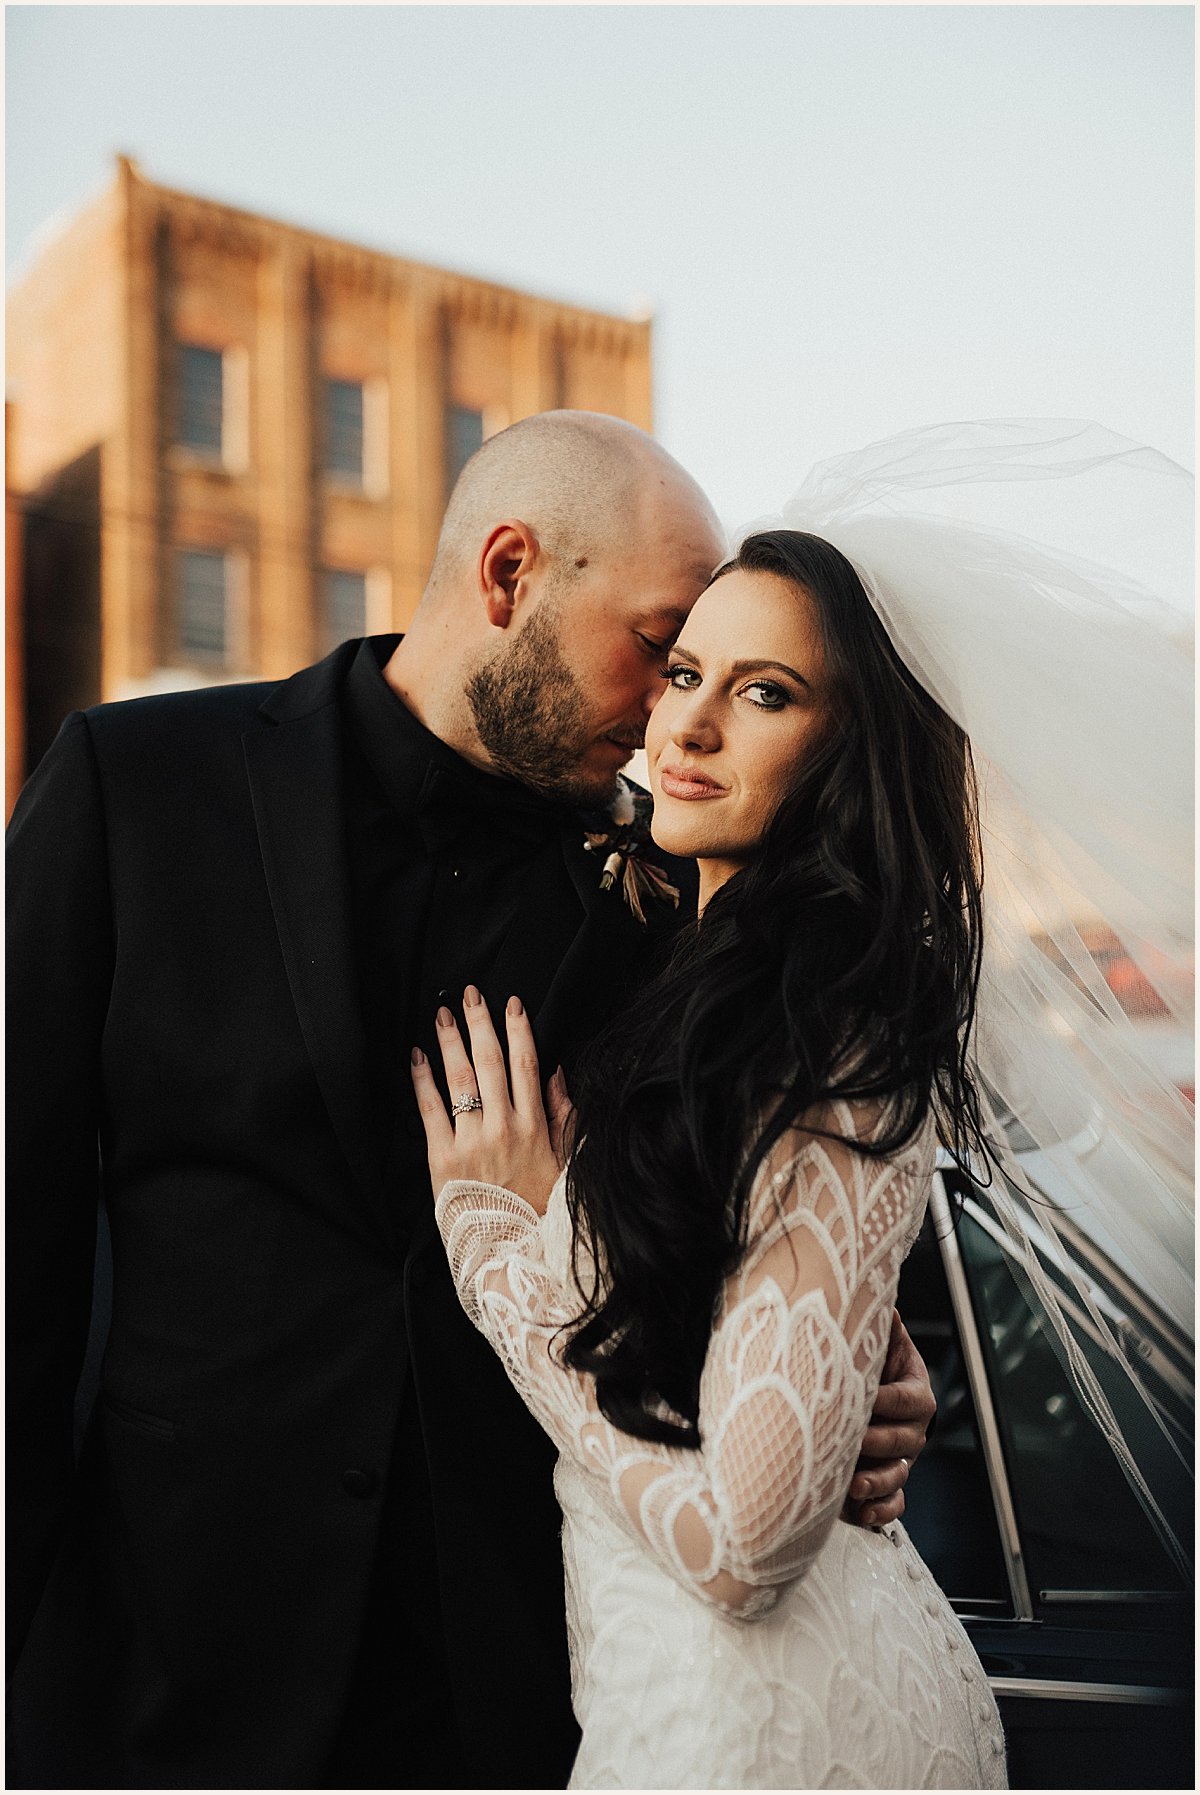 Edgy and Romantic Bride and Groom portraits on wedding day | Lauren Parr Photography